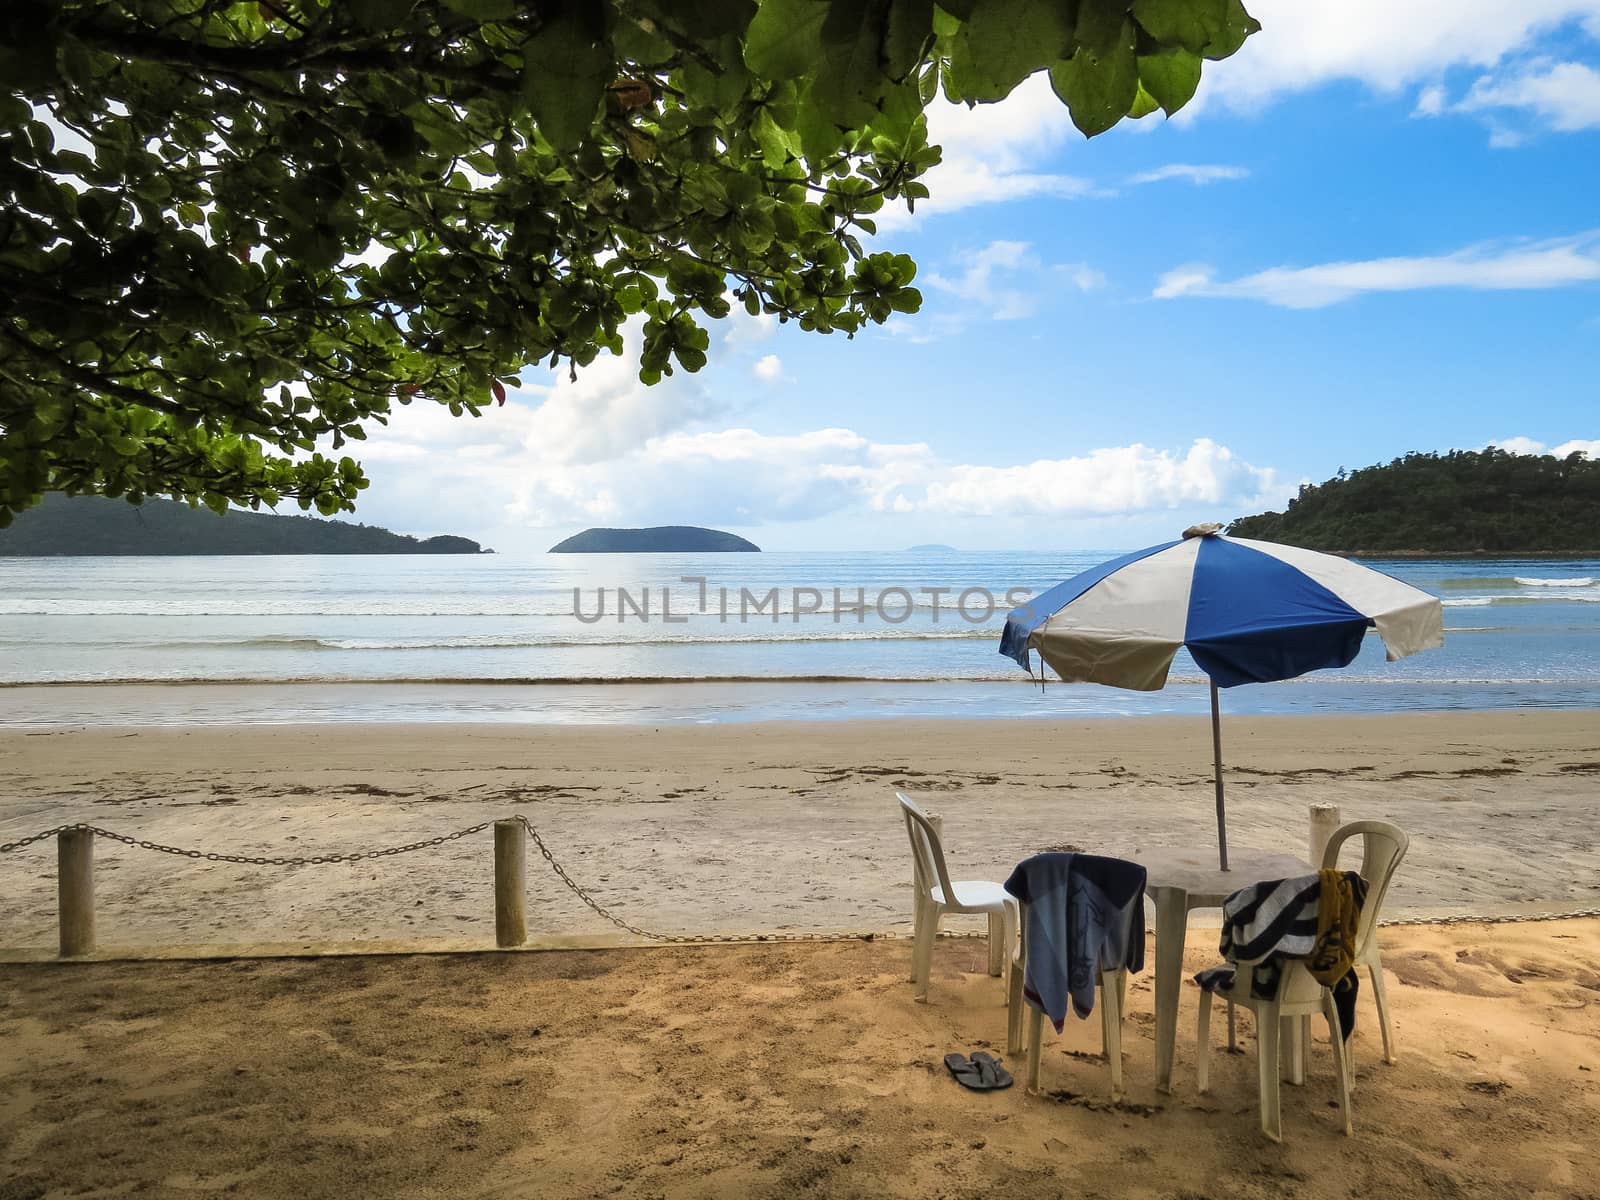 View of the beach, with chair and umbrella the shade of tree in the foreground, with coast and islands in the background, in Brazil.